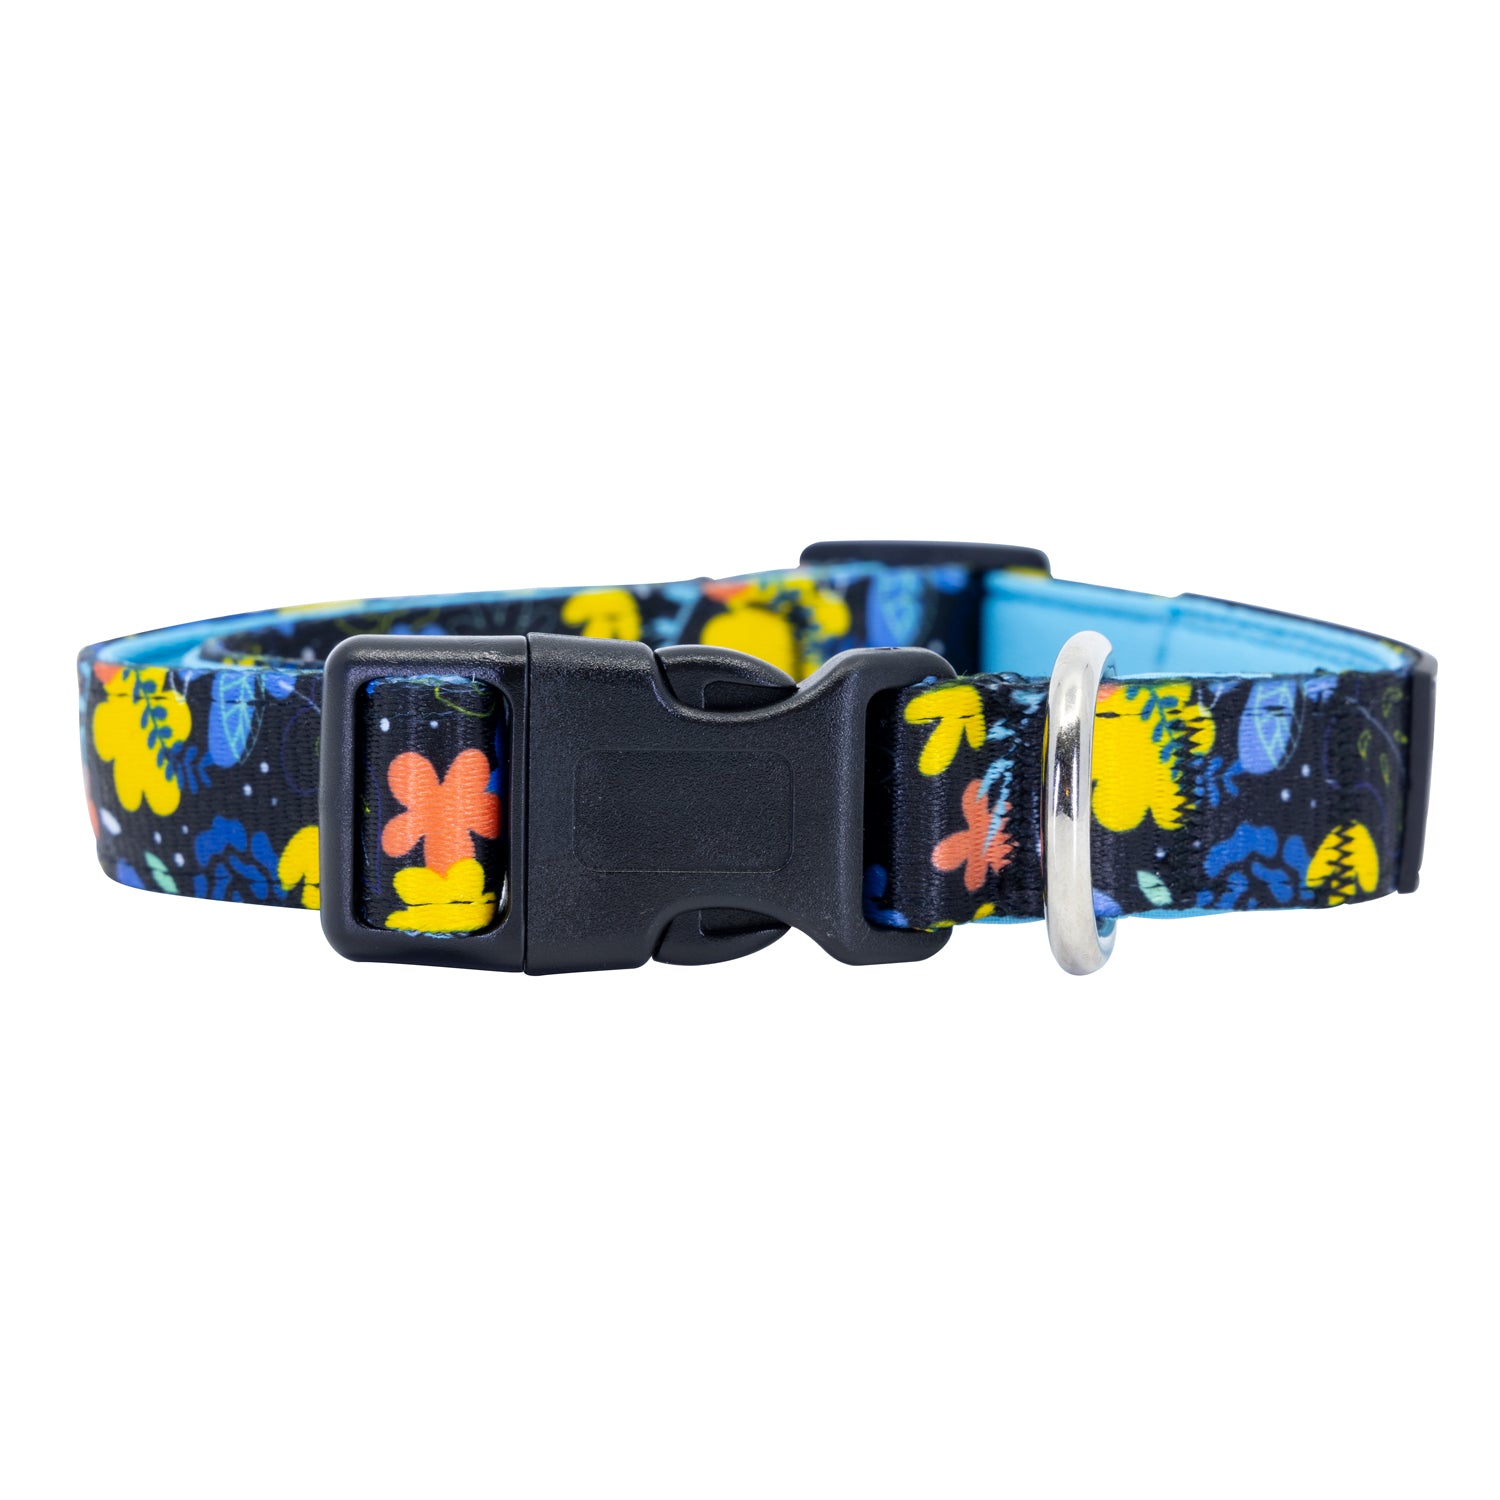 Nights-a-Bloom Dog Collar Buckle and D-Ring Product Shot